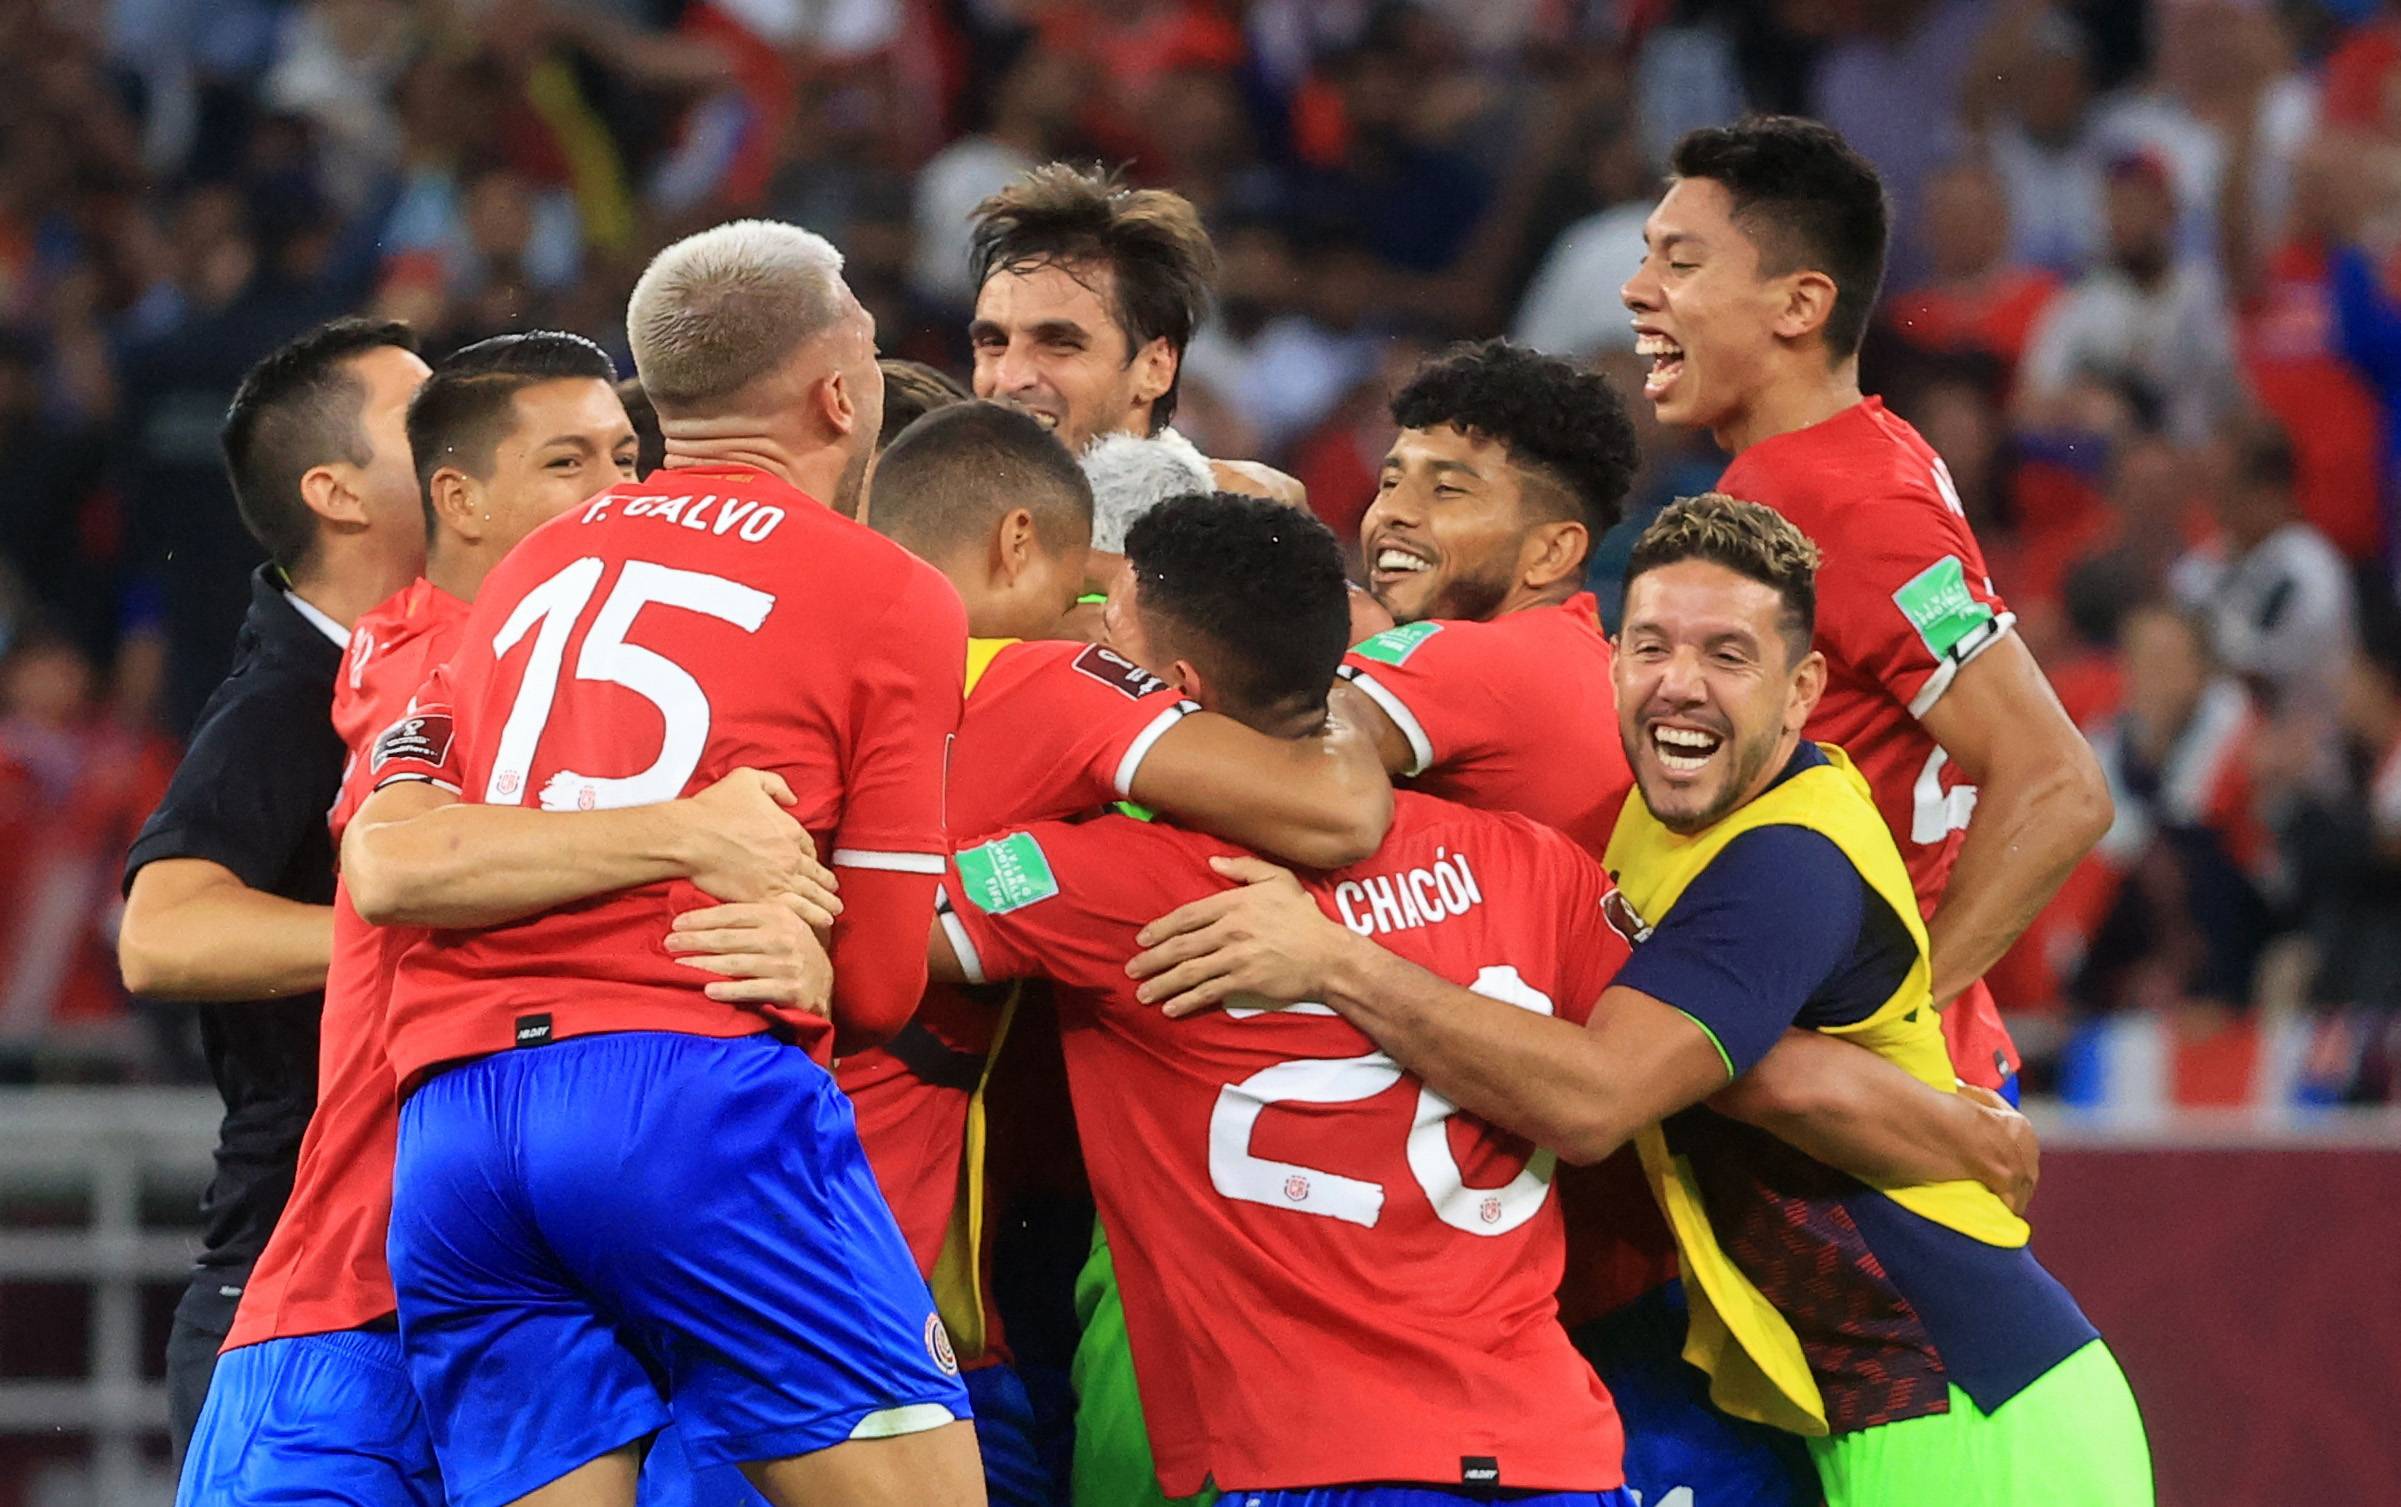 Costa Rica books place at 2022 World Cup finals after playoff win